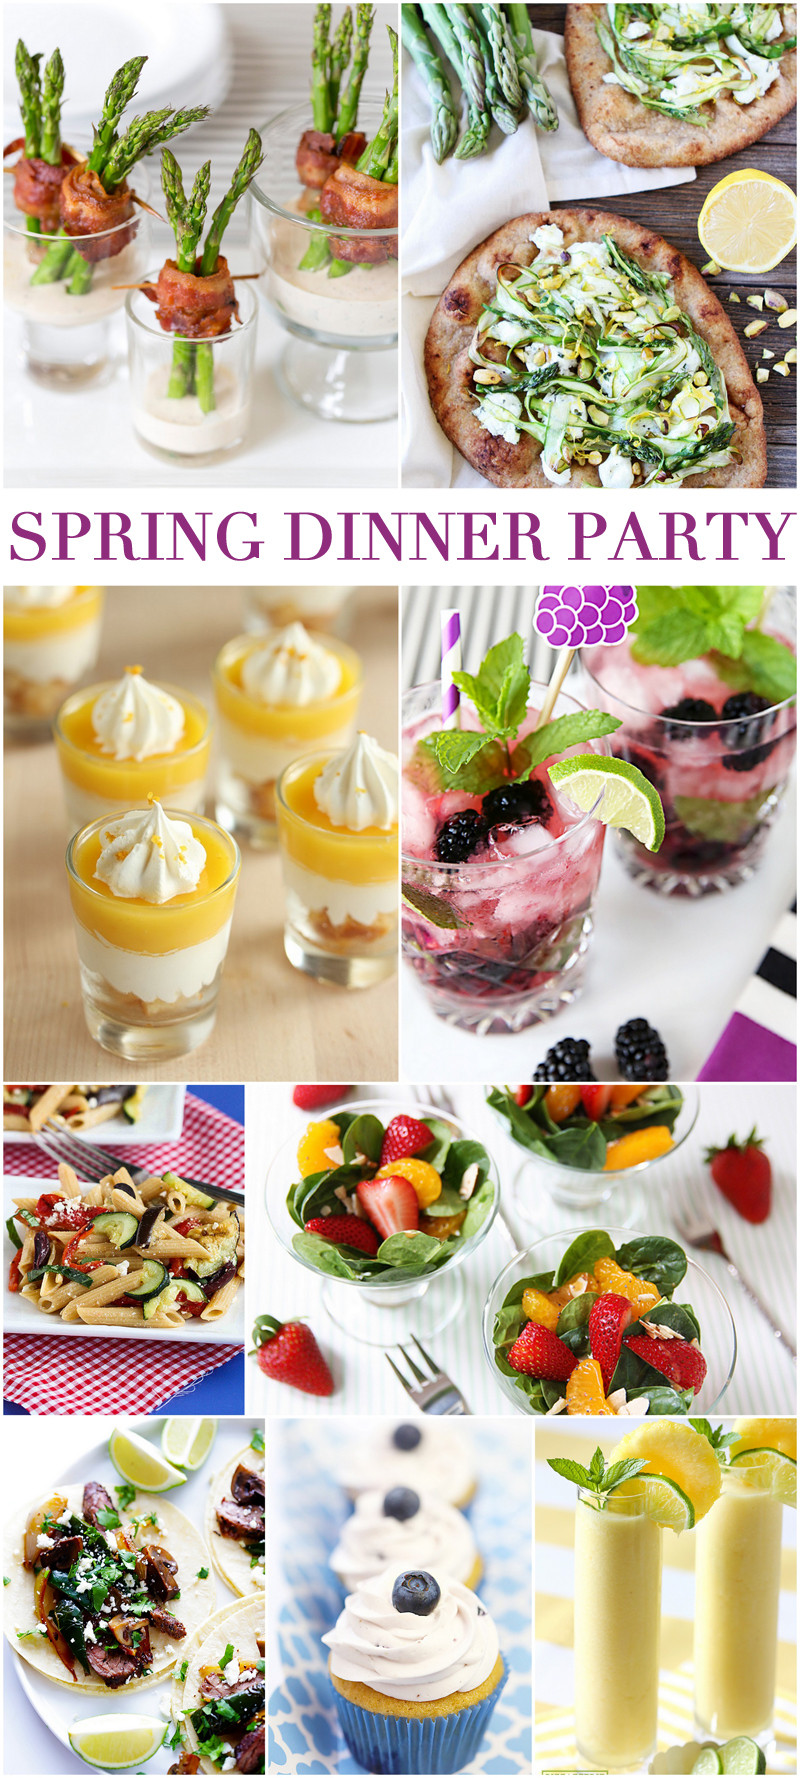 Spring Dinner Party Ideas
 Host a Spring Dinner Party in Style